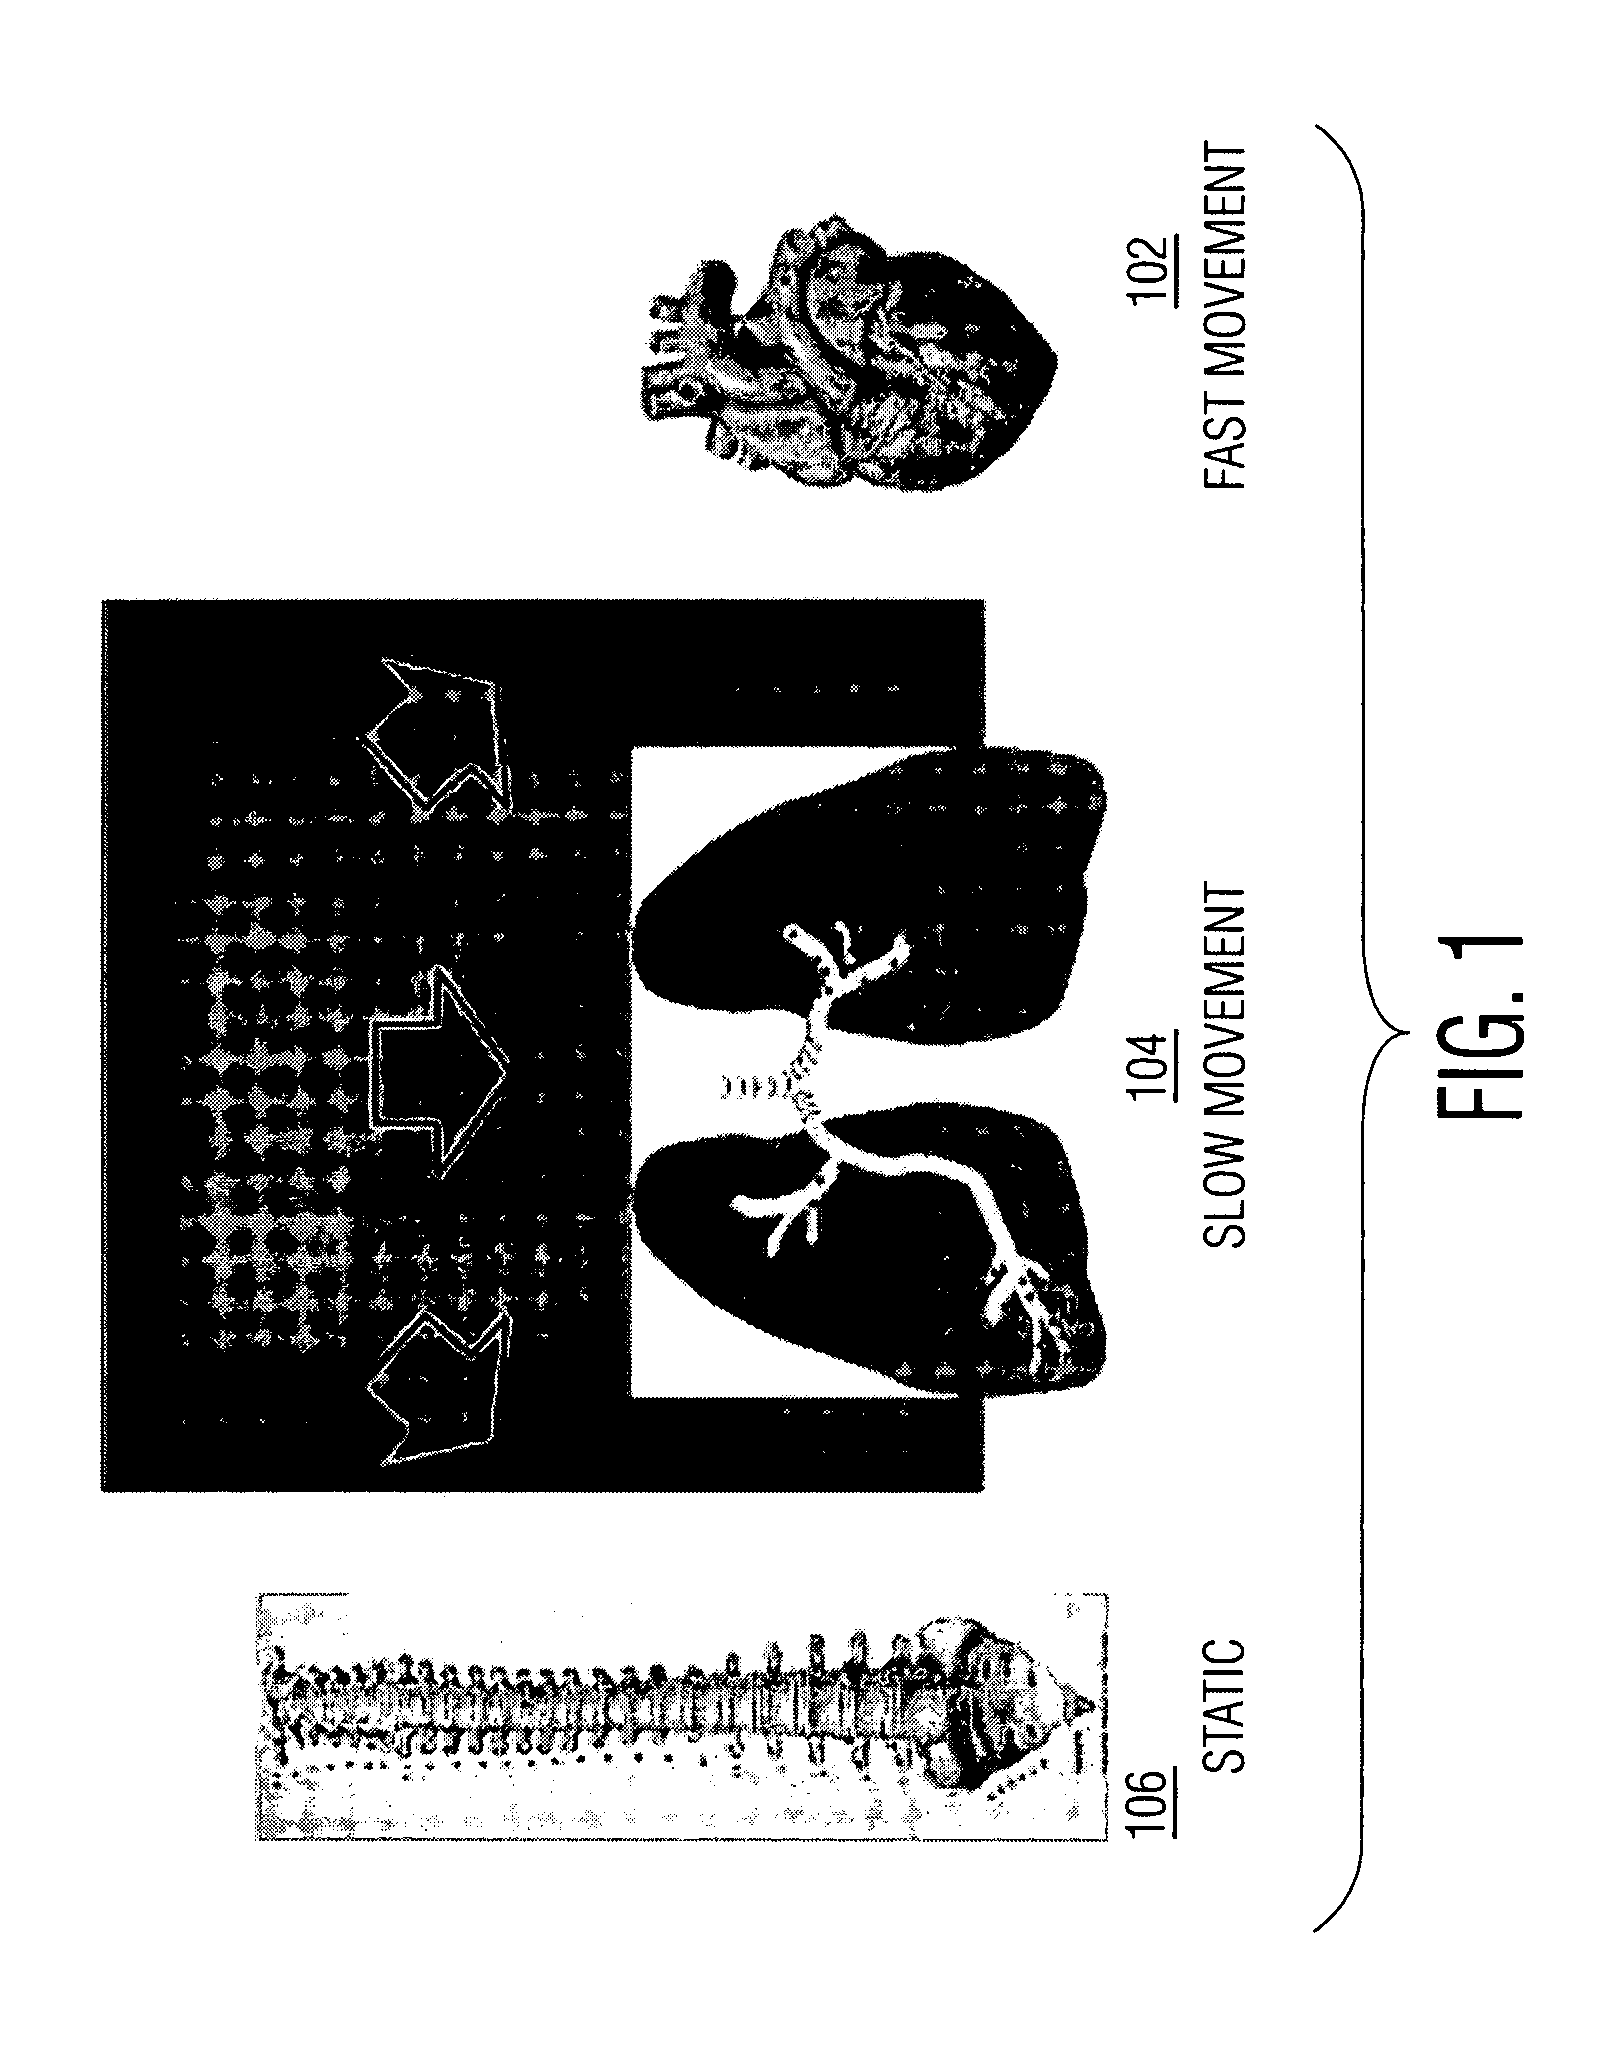 System and Method For Coronary Digital Subtraction Angiography